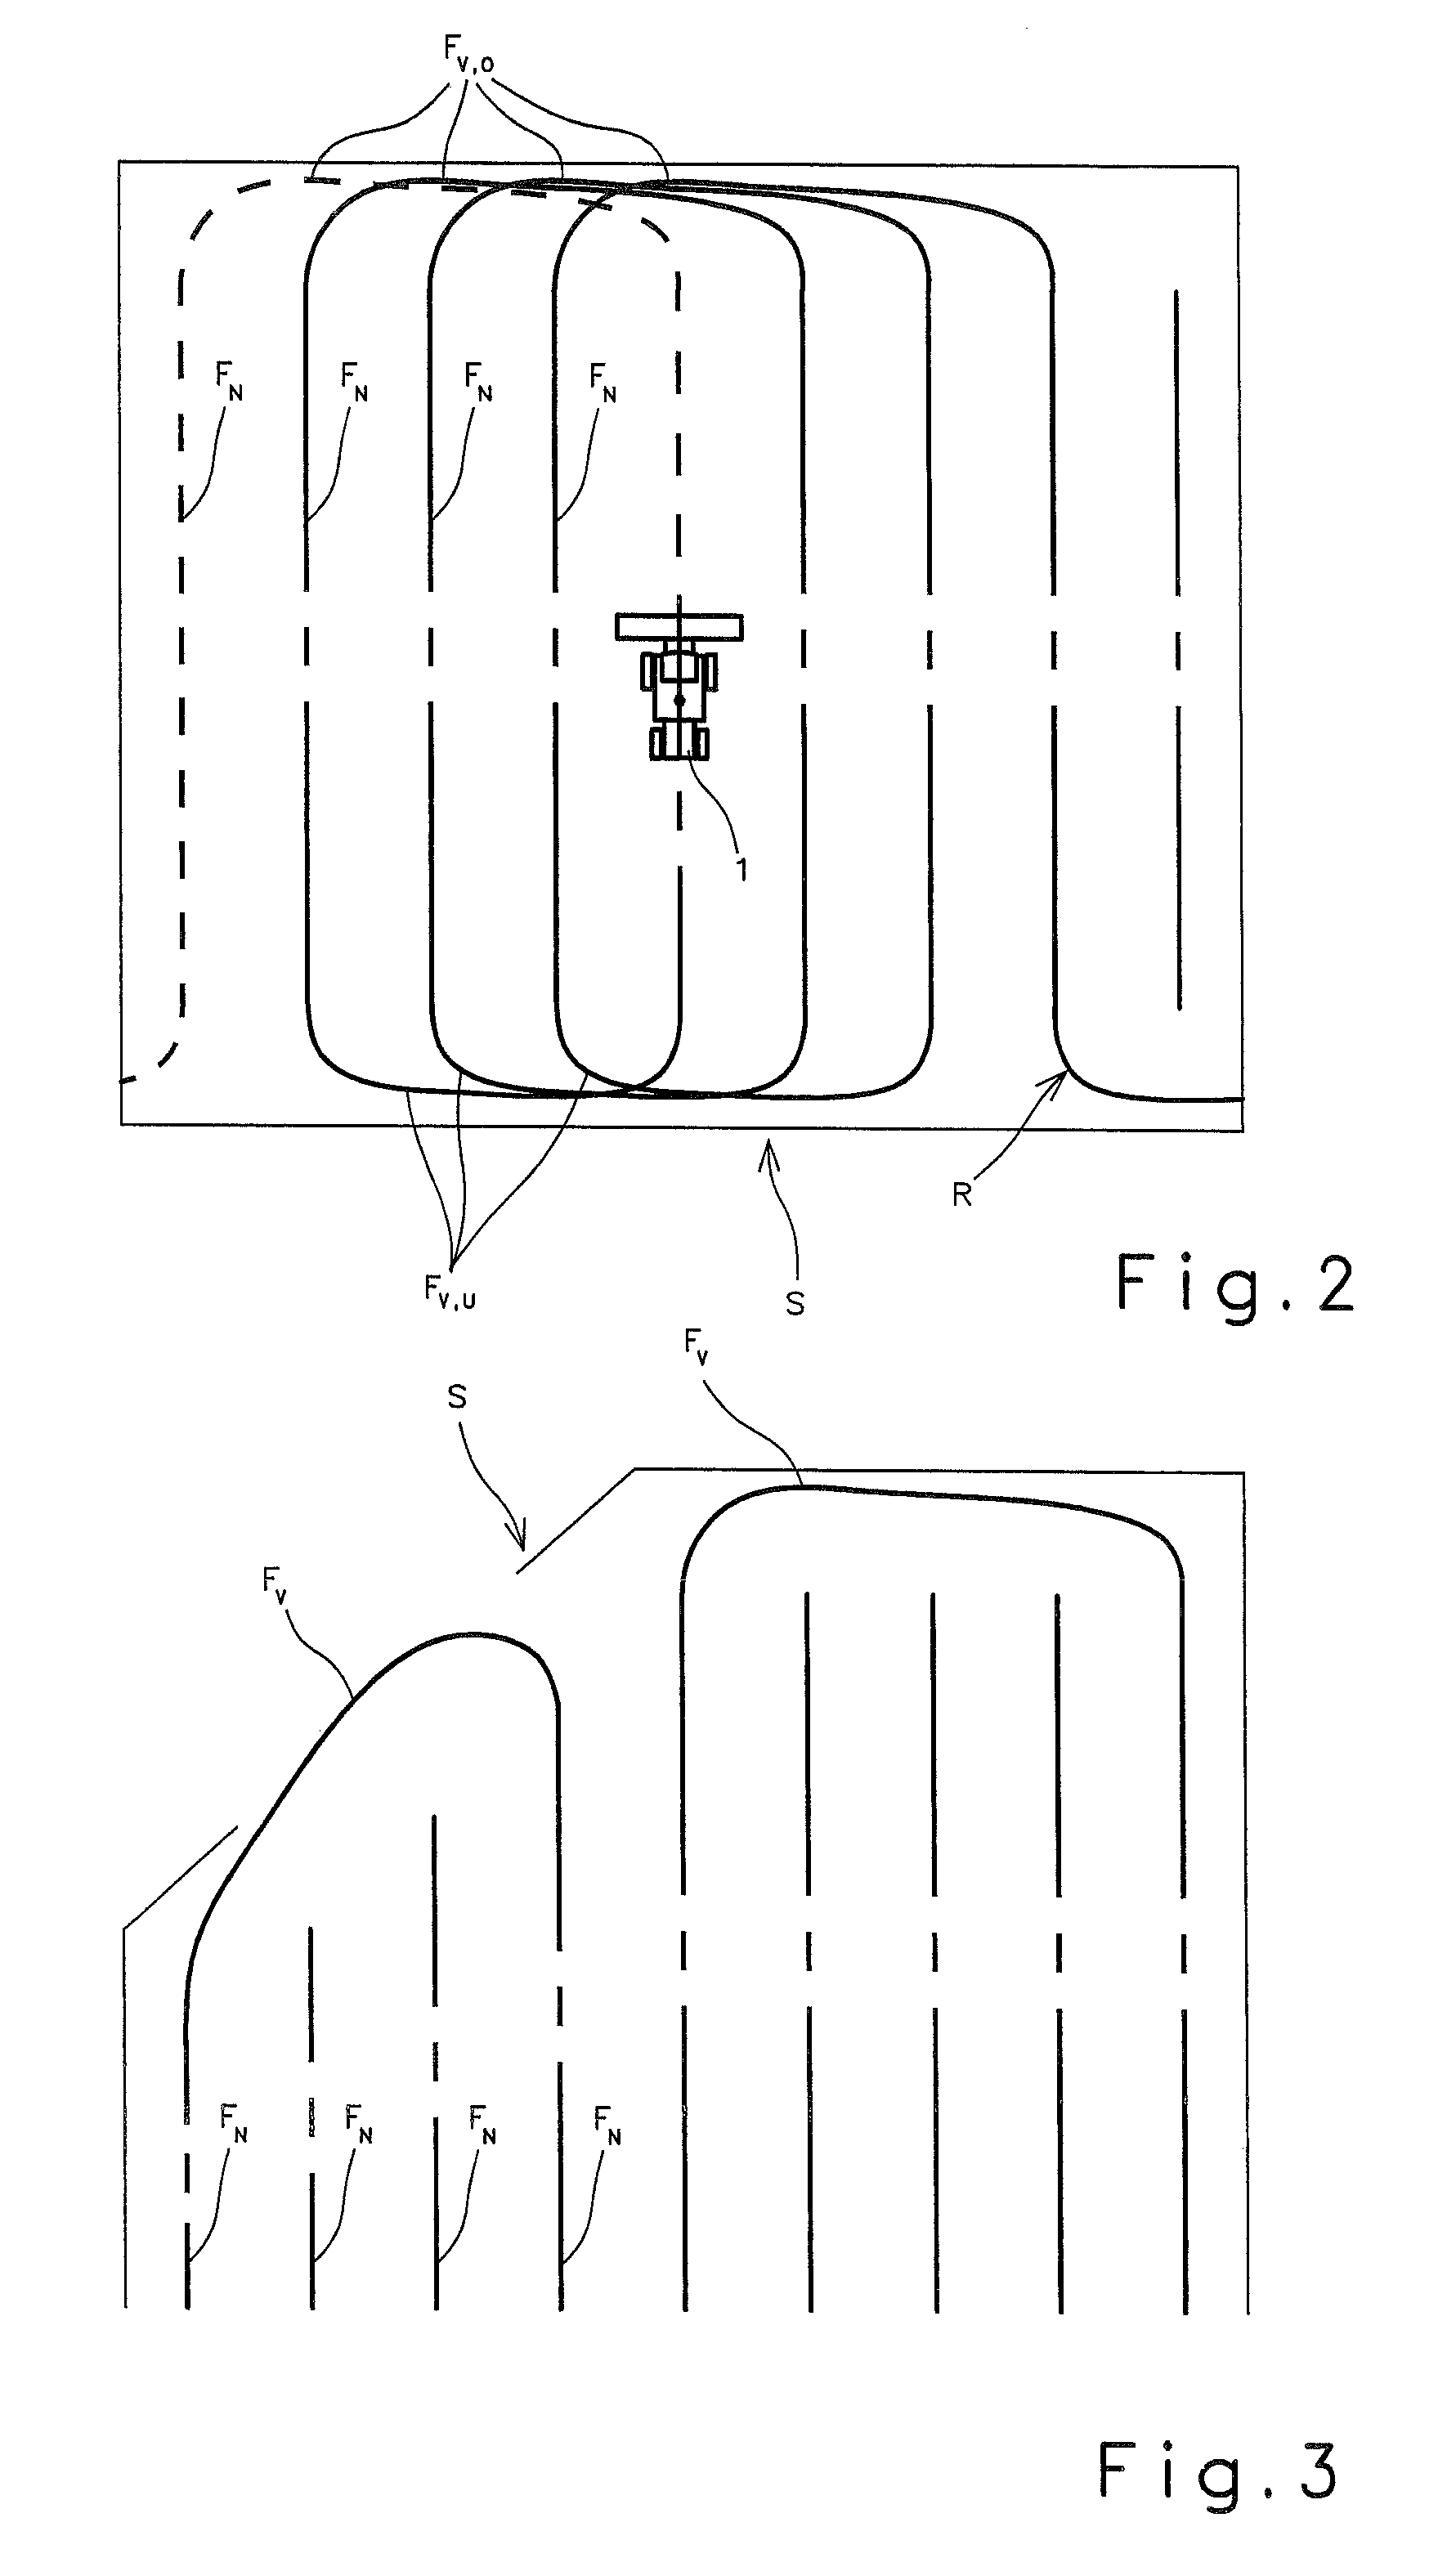 Method for controlling an agricultural machine system